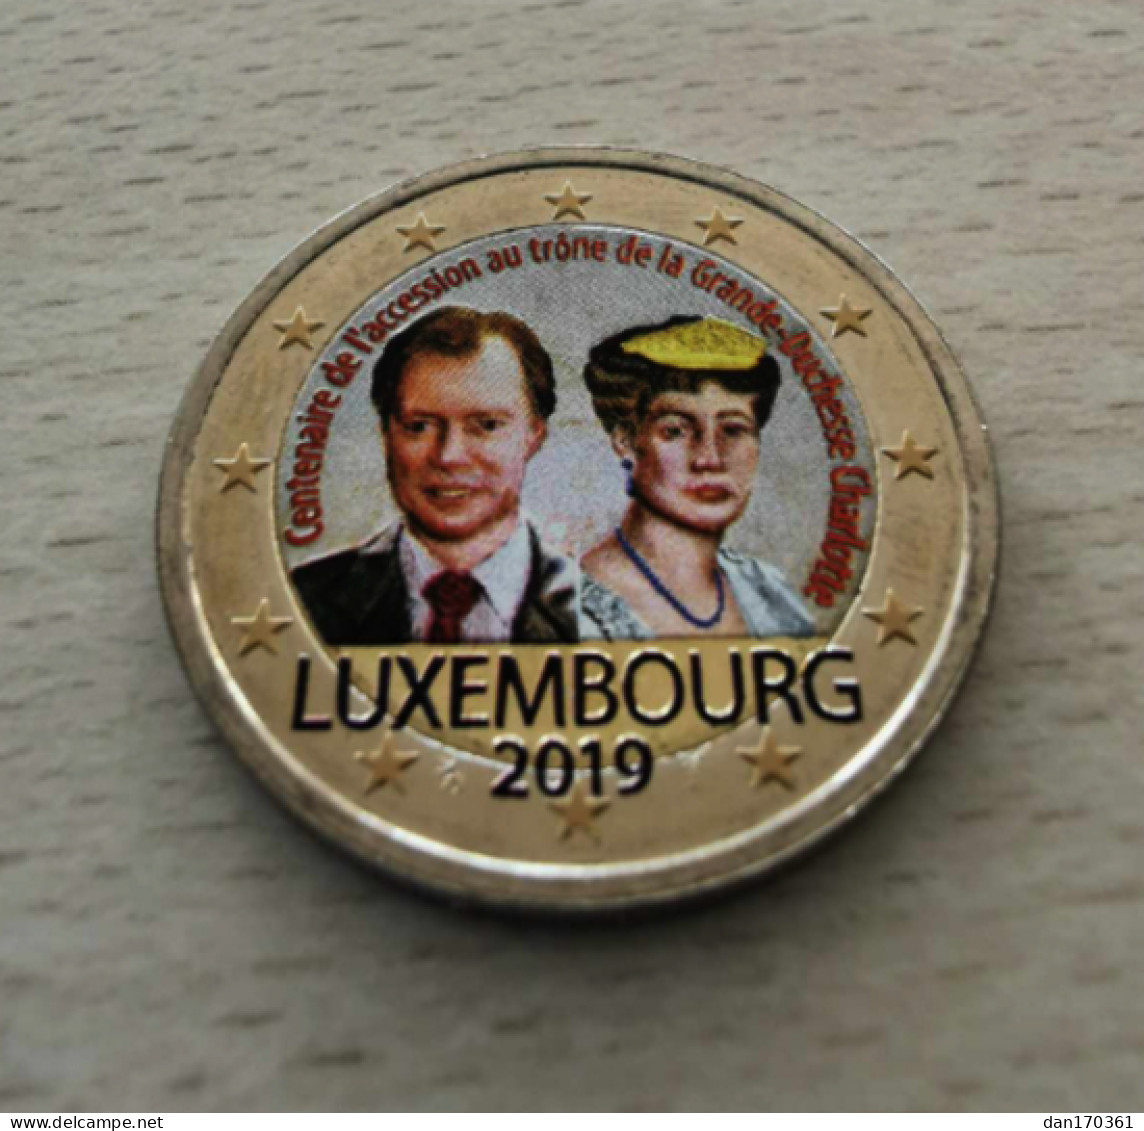 LUXEMBOURG 2019 - 2 EUROS - ACCESSION TRONE CHARLOTTE - COULEUR - FARBE- COLORISEE - COULEURS - COLORED - COLOR - Luxemburgo